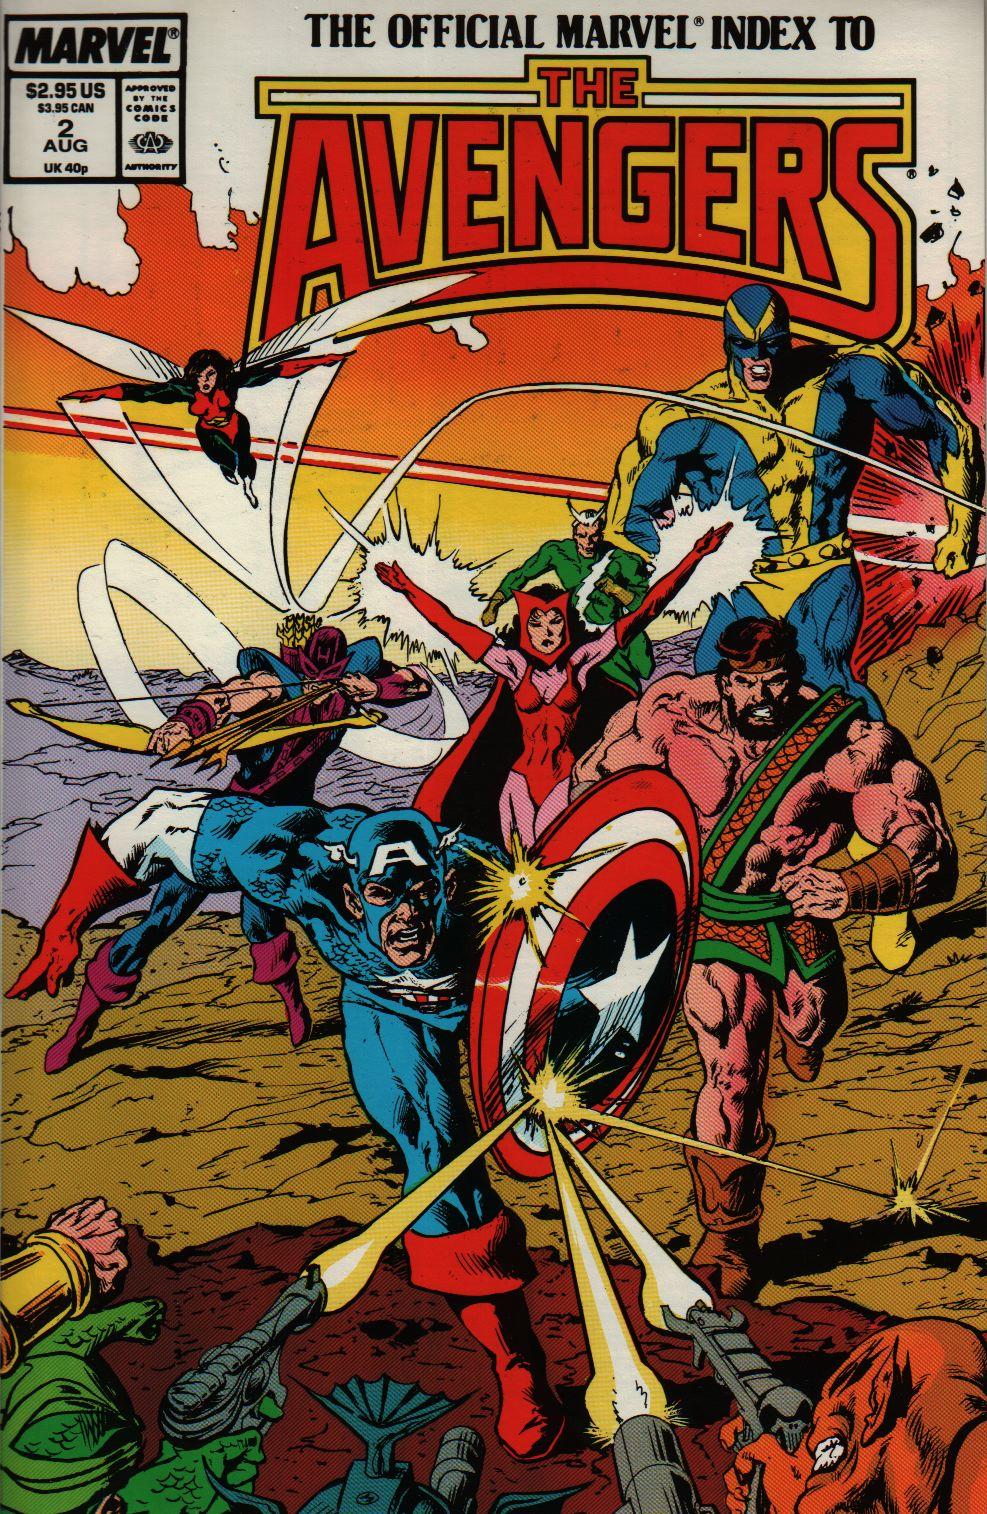 Official Marvel Index to Avengers Vol. 1 #2